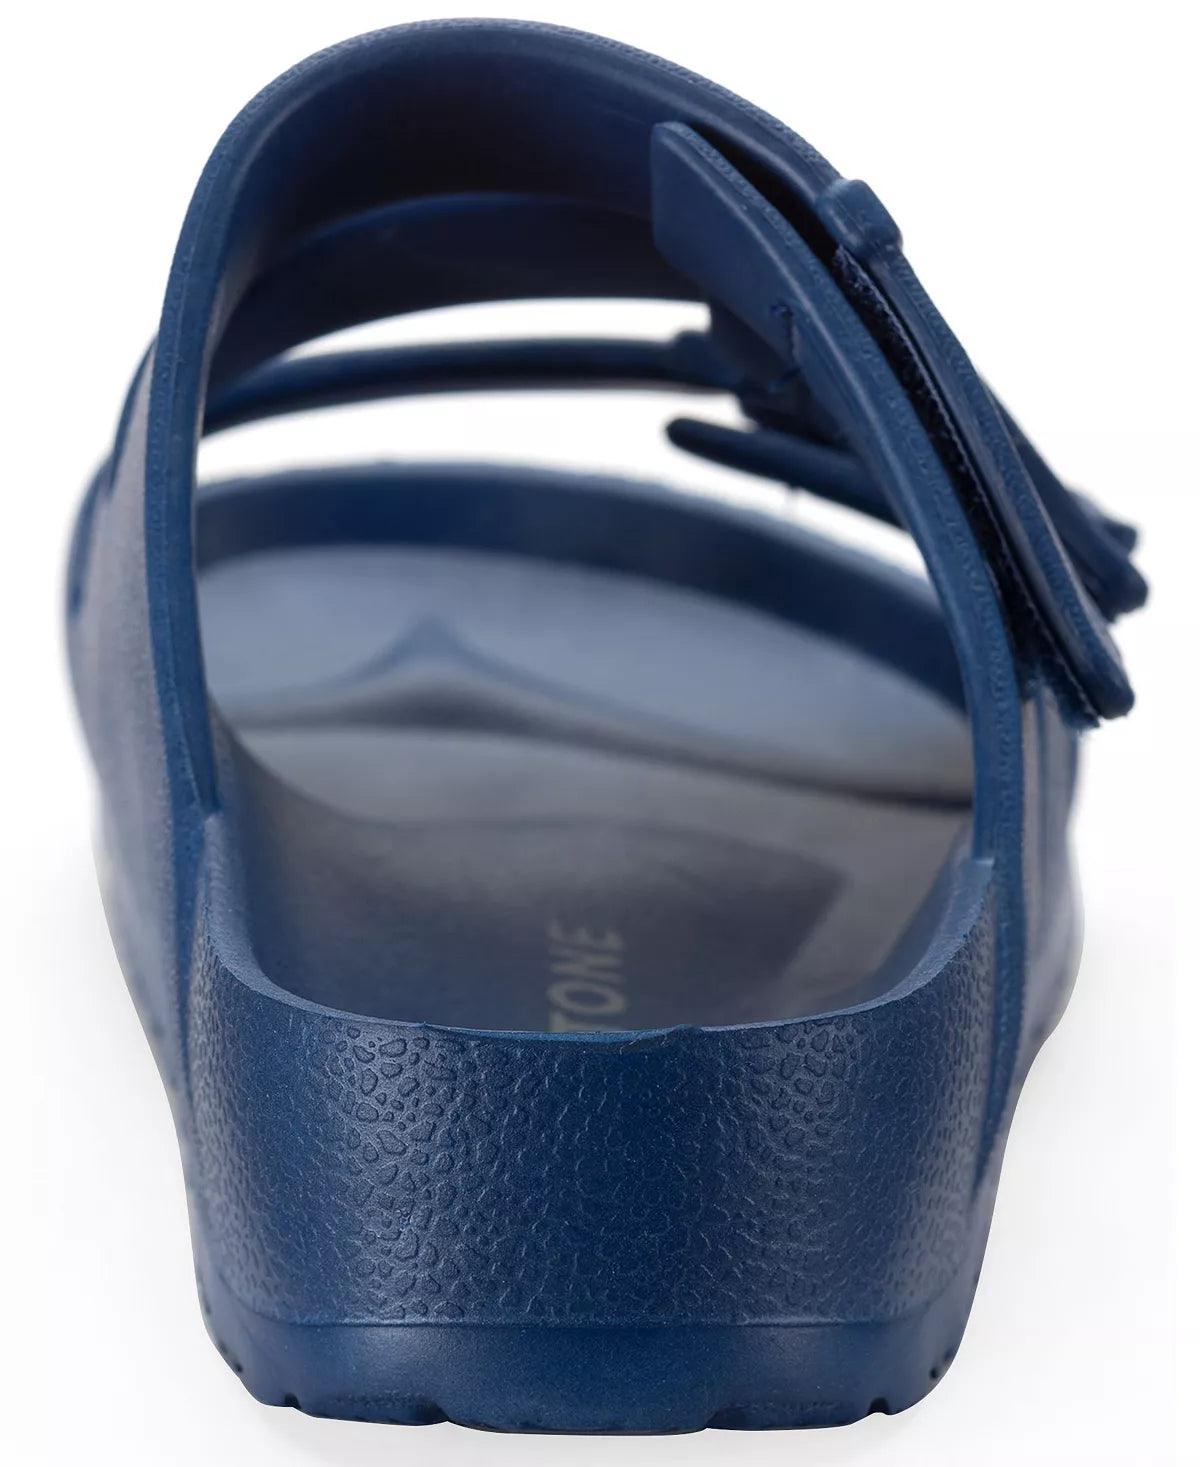 sun and stone | boys open toe slip-on bowie sandals | navy size 12m - Home Revival Shop